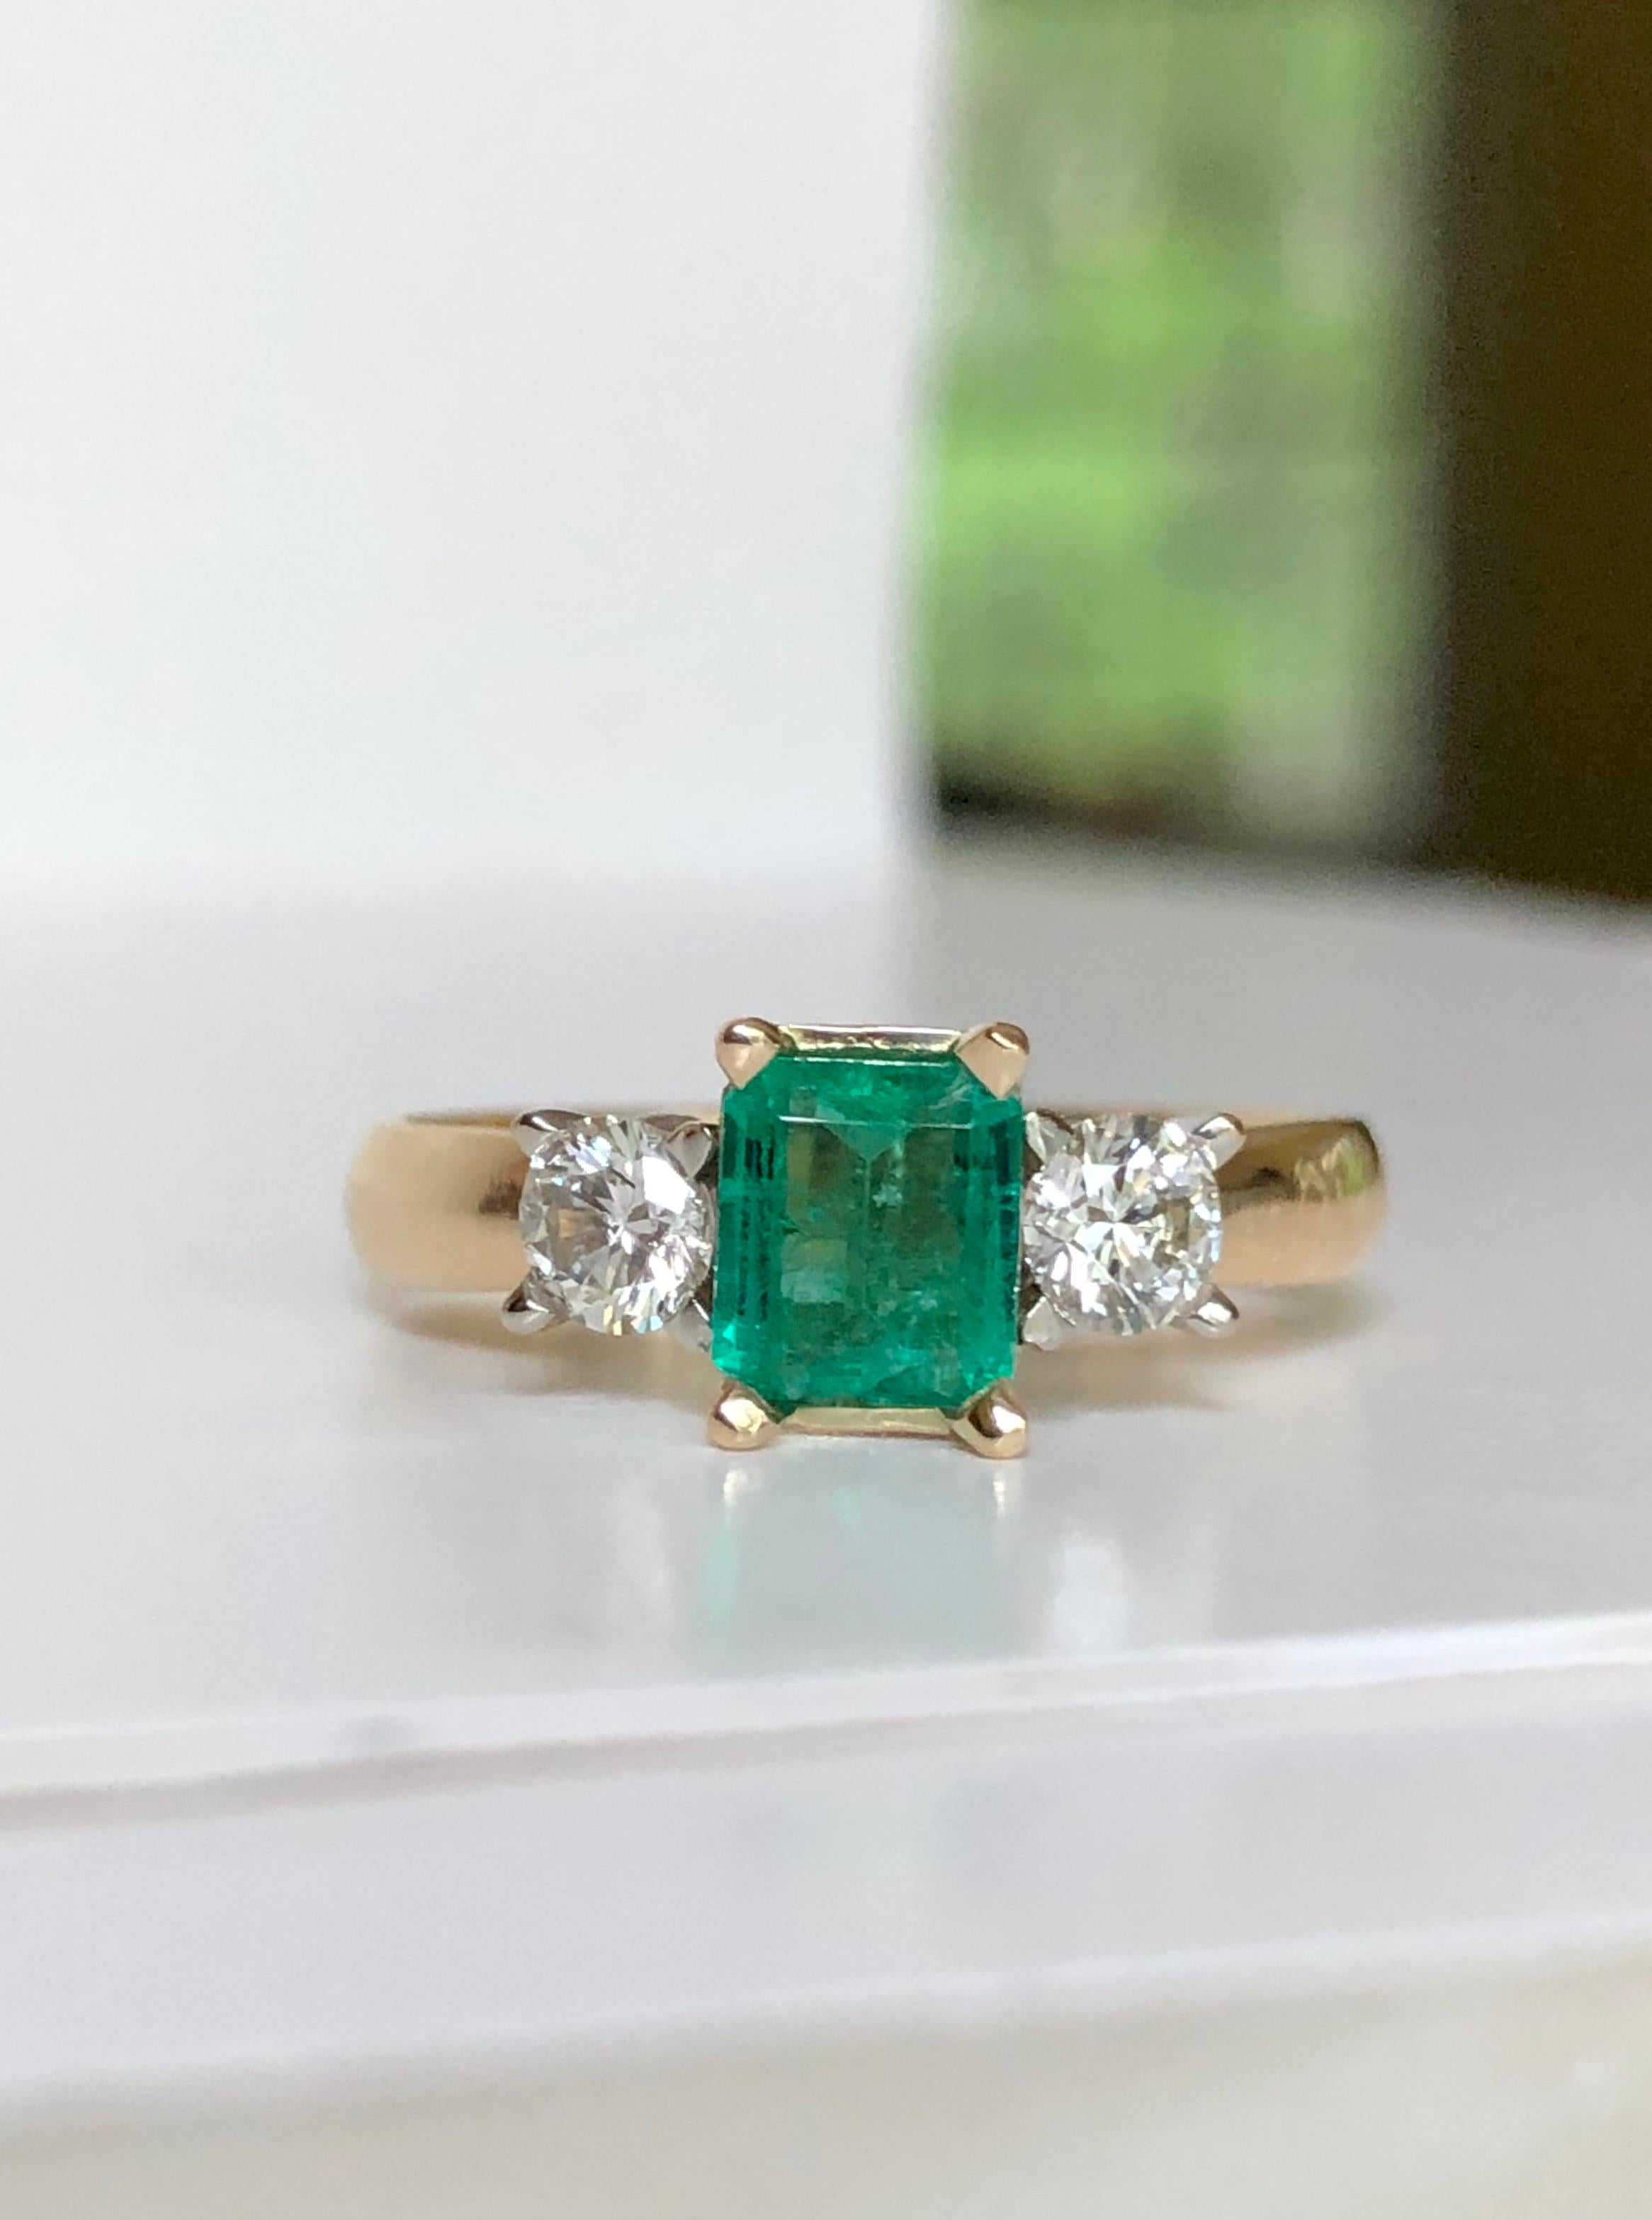 18K yellow gold natural Emerald and Diamond Engagement Ring 3 Stone emerald cut emerald. 
Total Emerald weight is 0.51 carats, high clarity, rich green color, excellent brightness from 
Colombia. Total Diamond weight is 0.38 carats, round brilliant